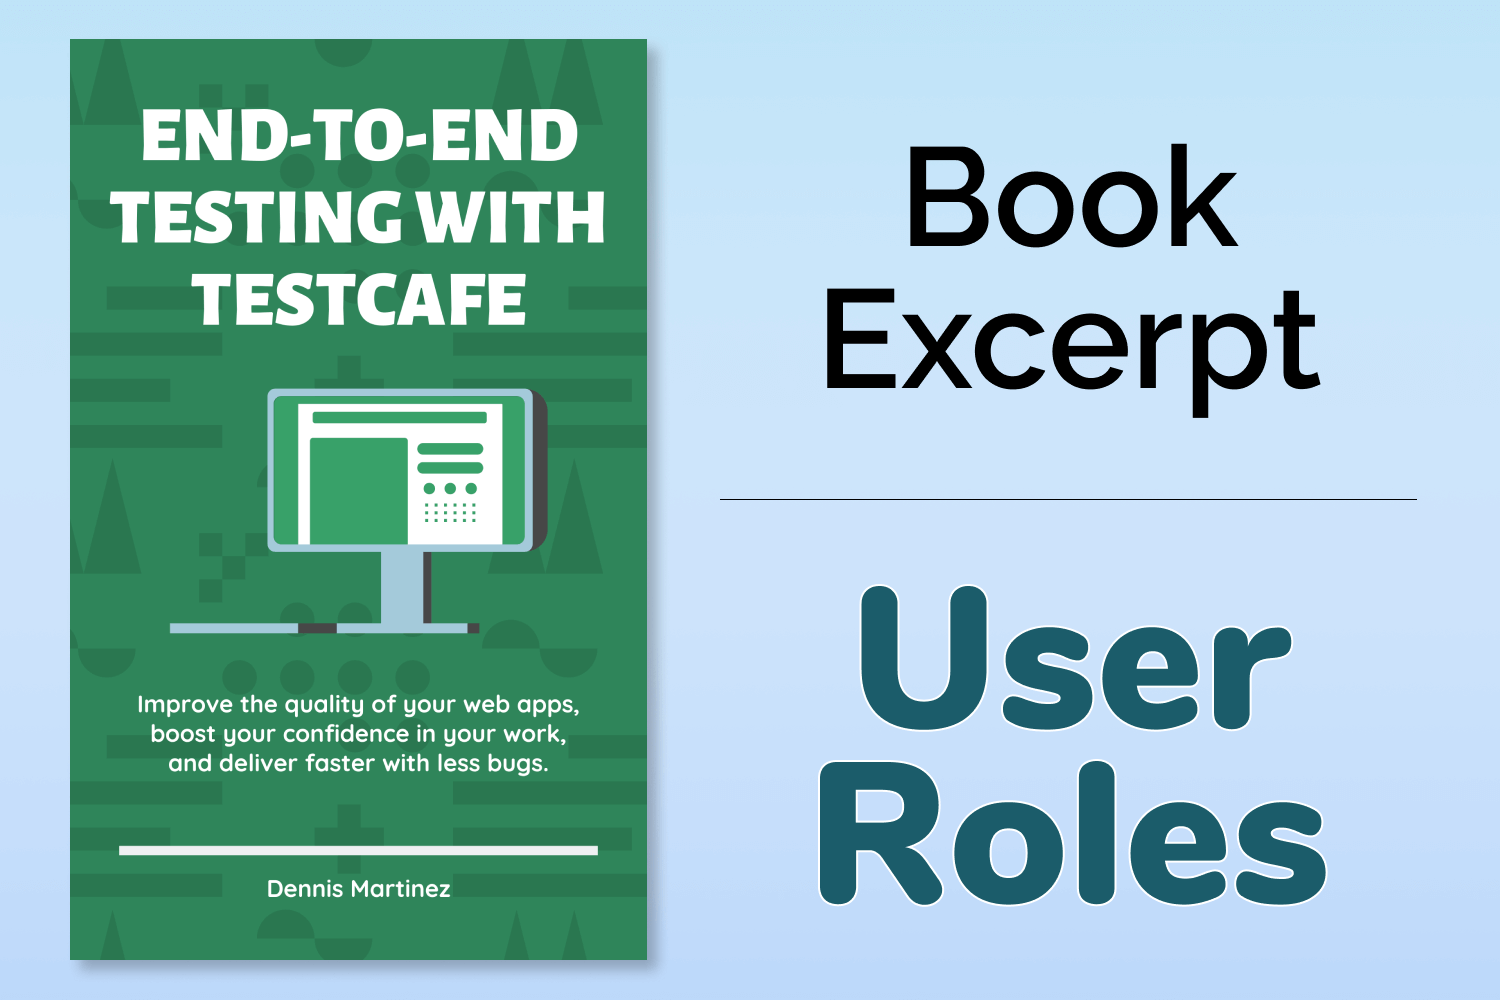 End-to-End Testing with TestCafe Book Excerpt: User Roles